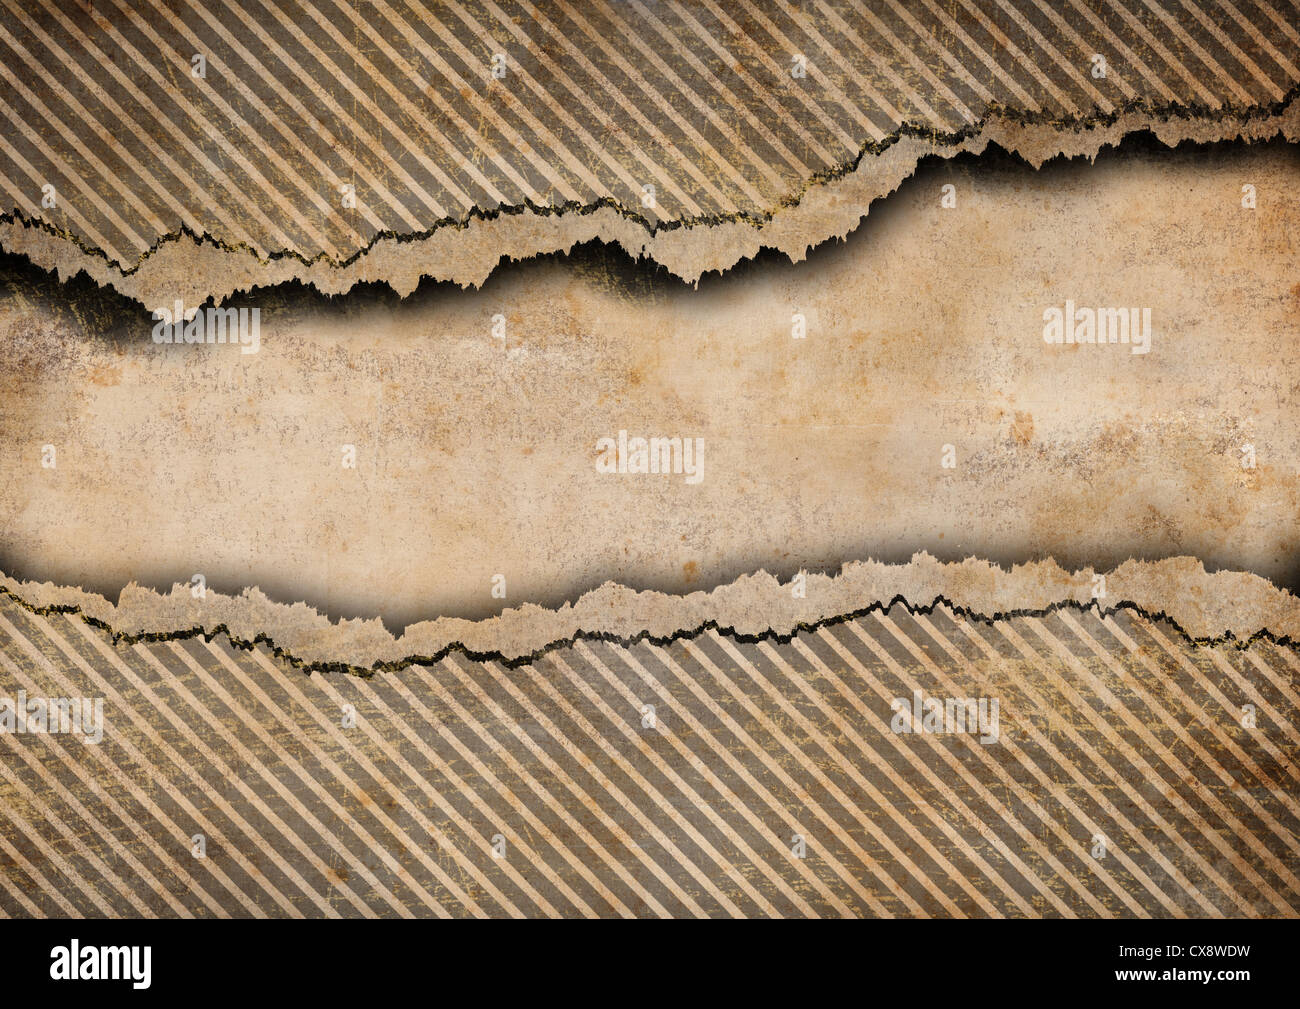 Grunge torn cardboard background with gray stripes Stock Photo